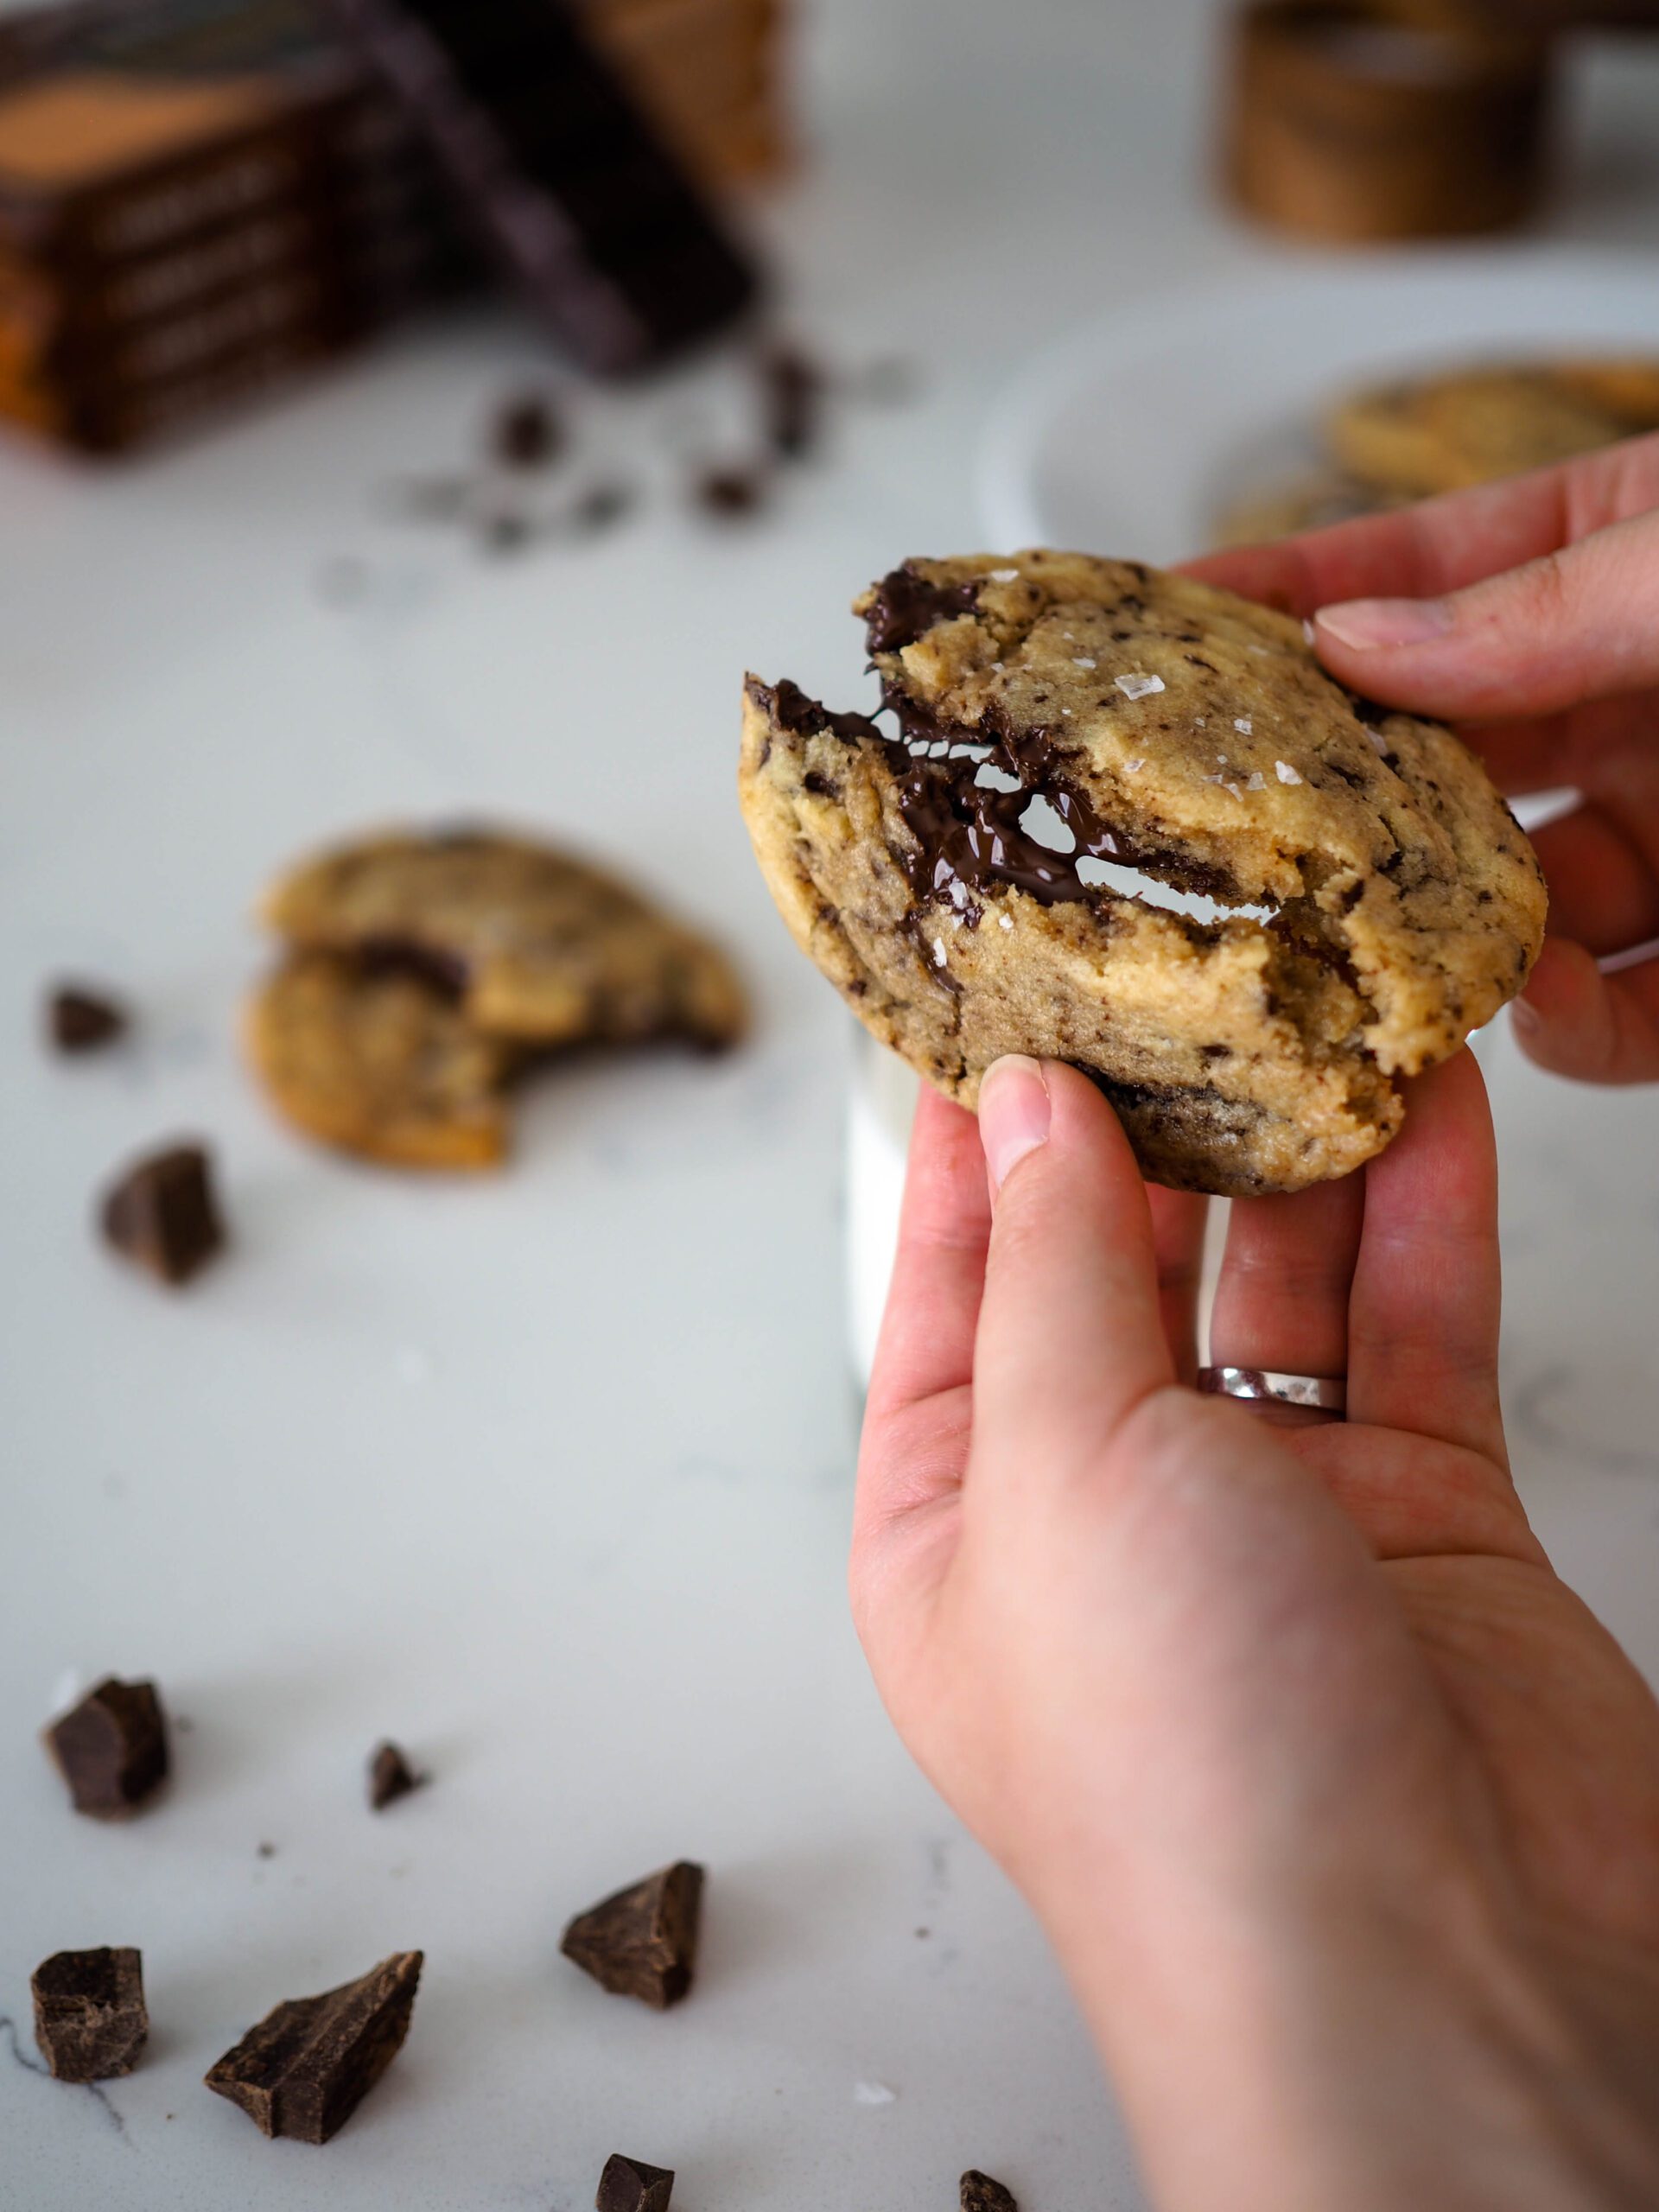 A dark chocolate chip cookie is broken in half by two hands.